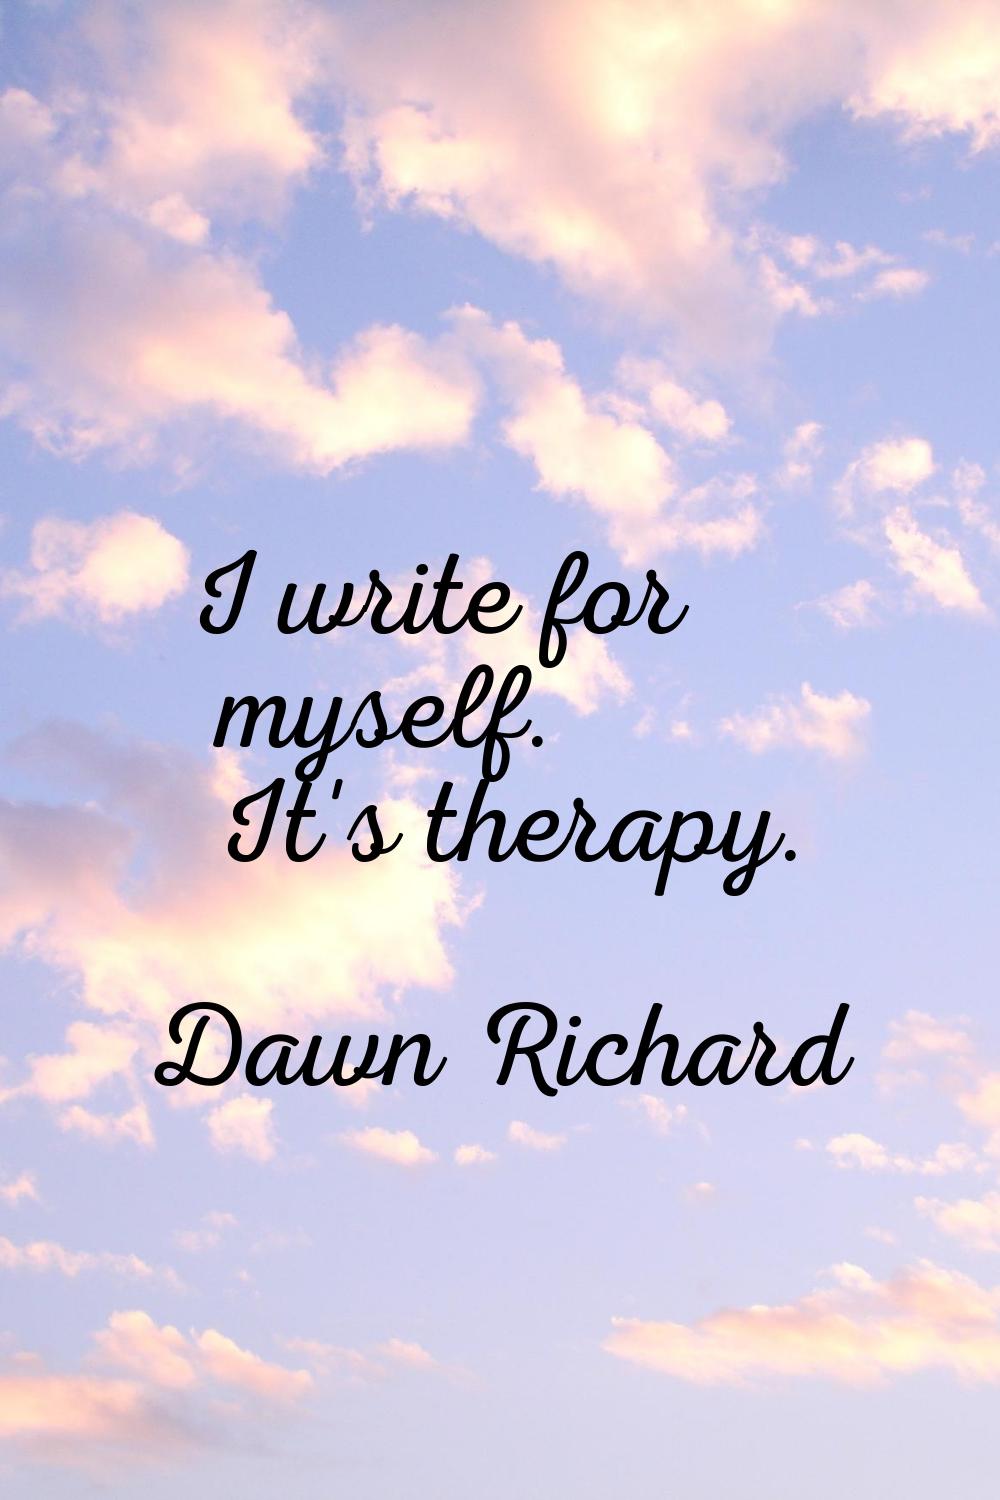 I write for myself. It's therapy.